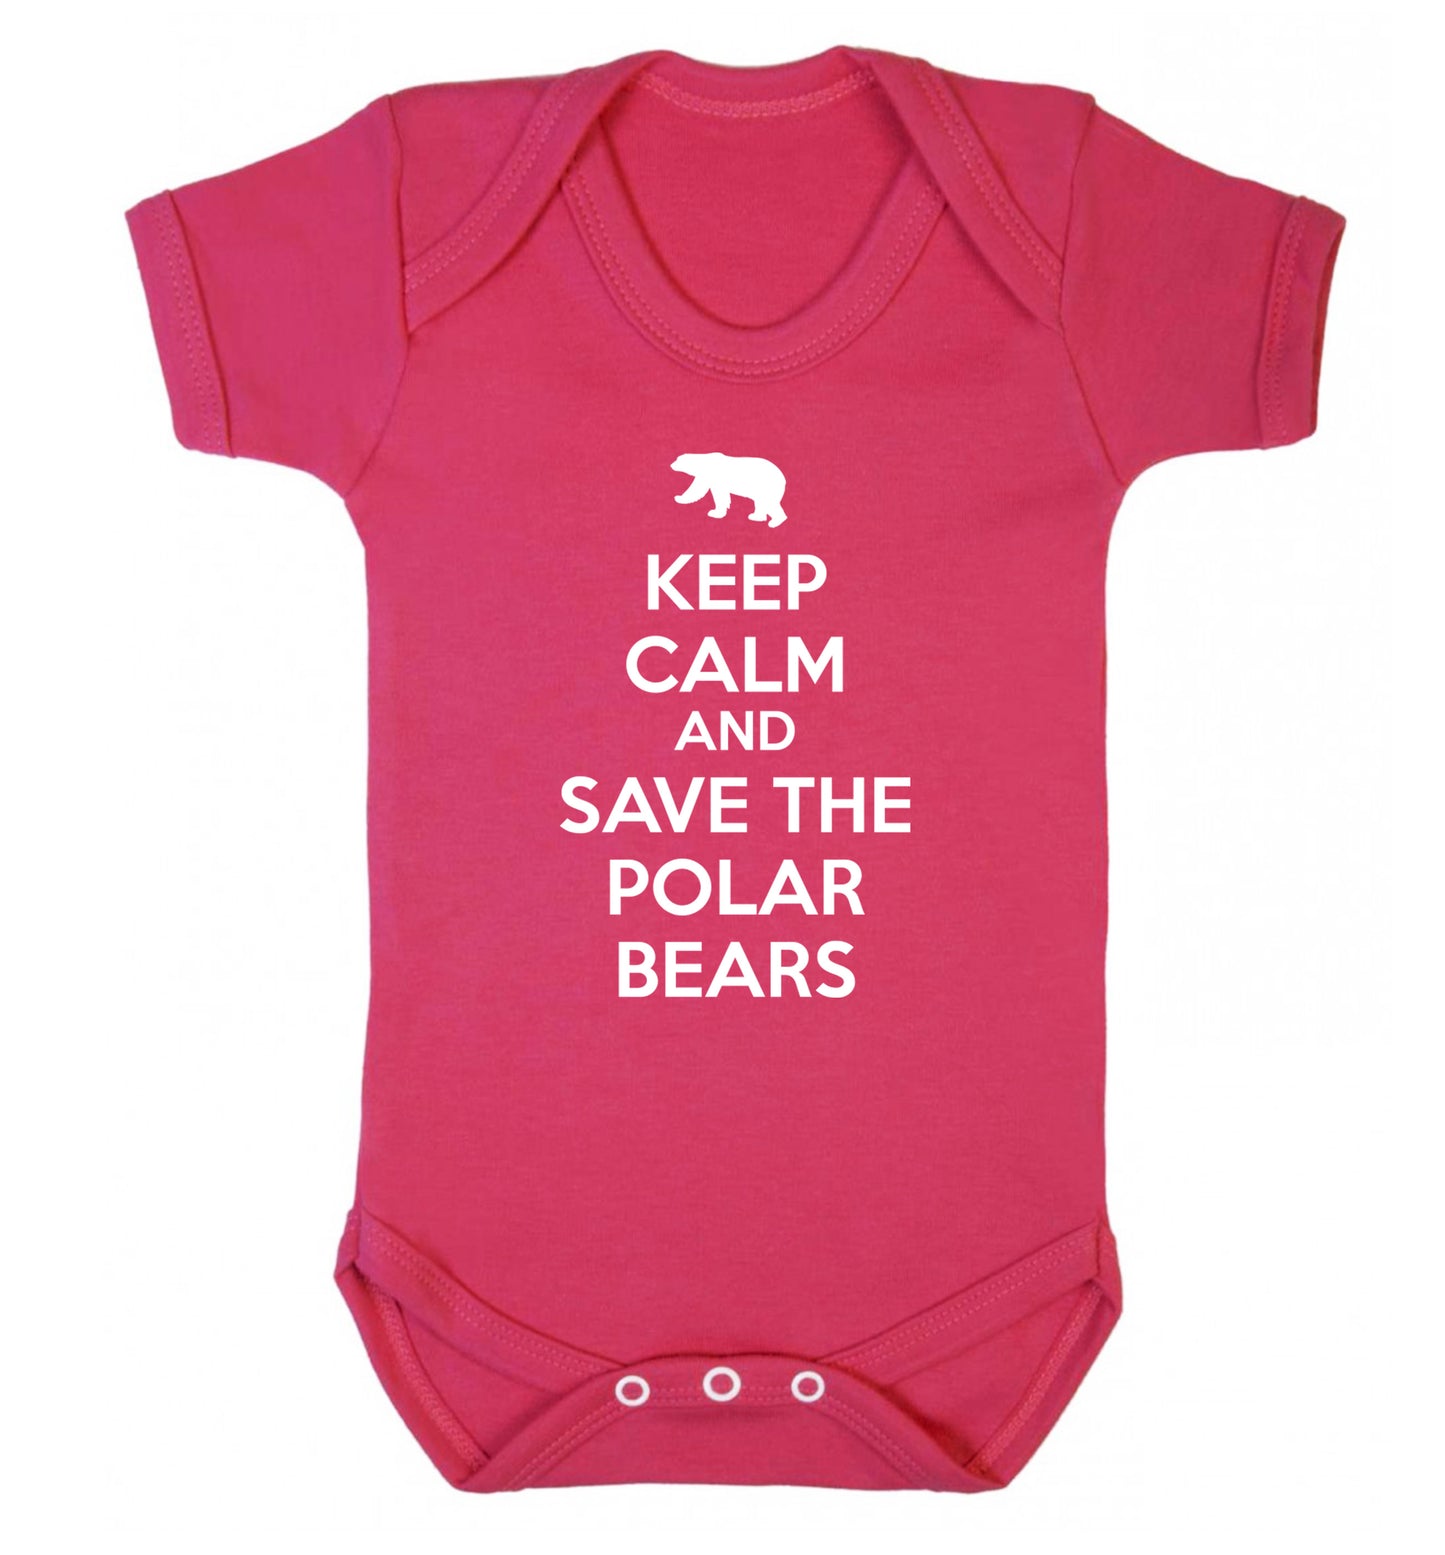 Keep calm and save the polar bears Baby Vest dark pink 18-24 months